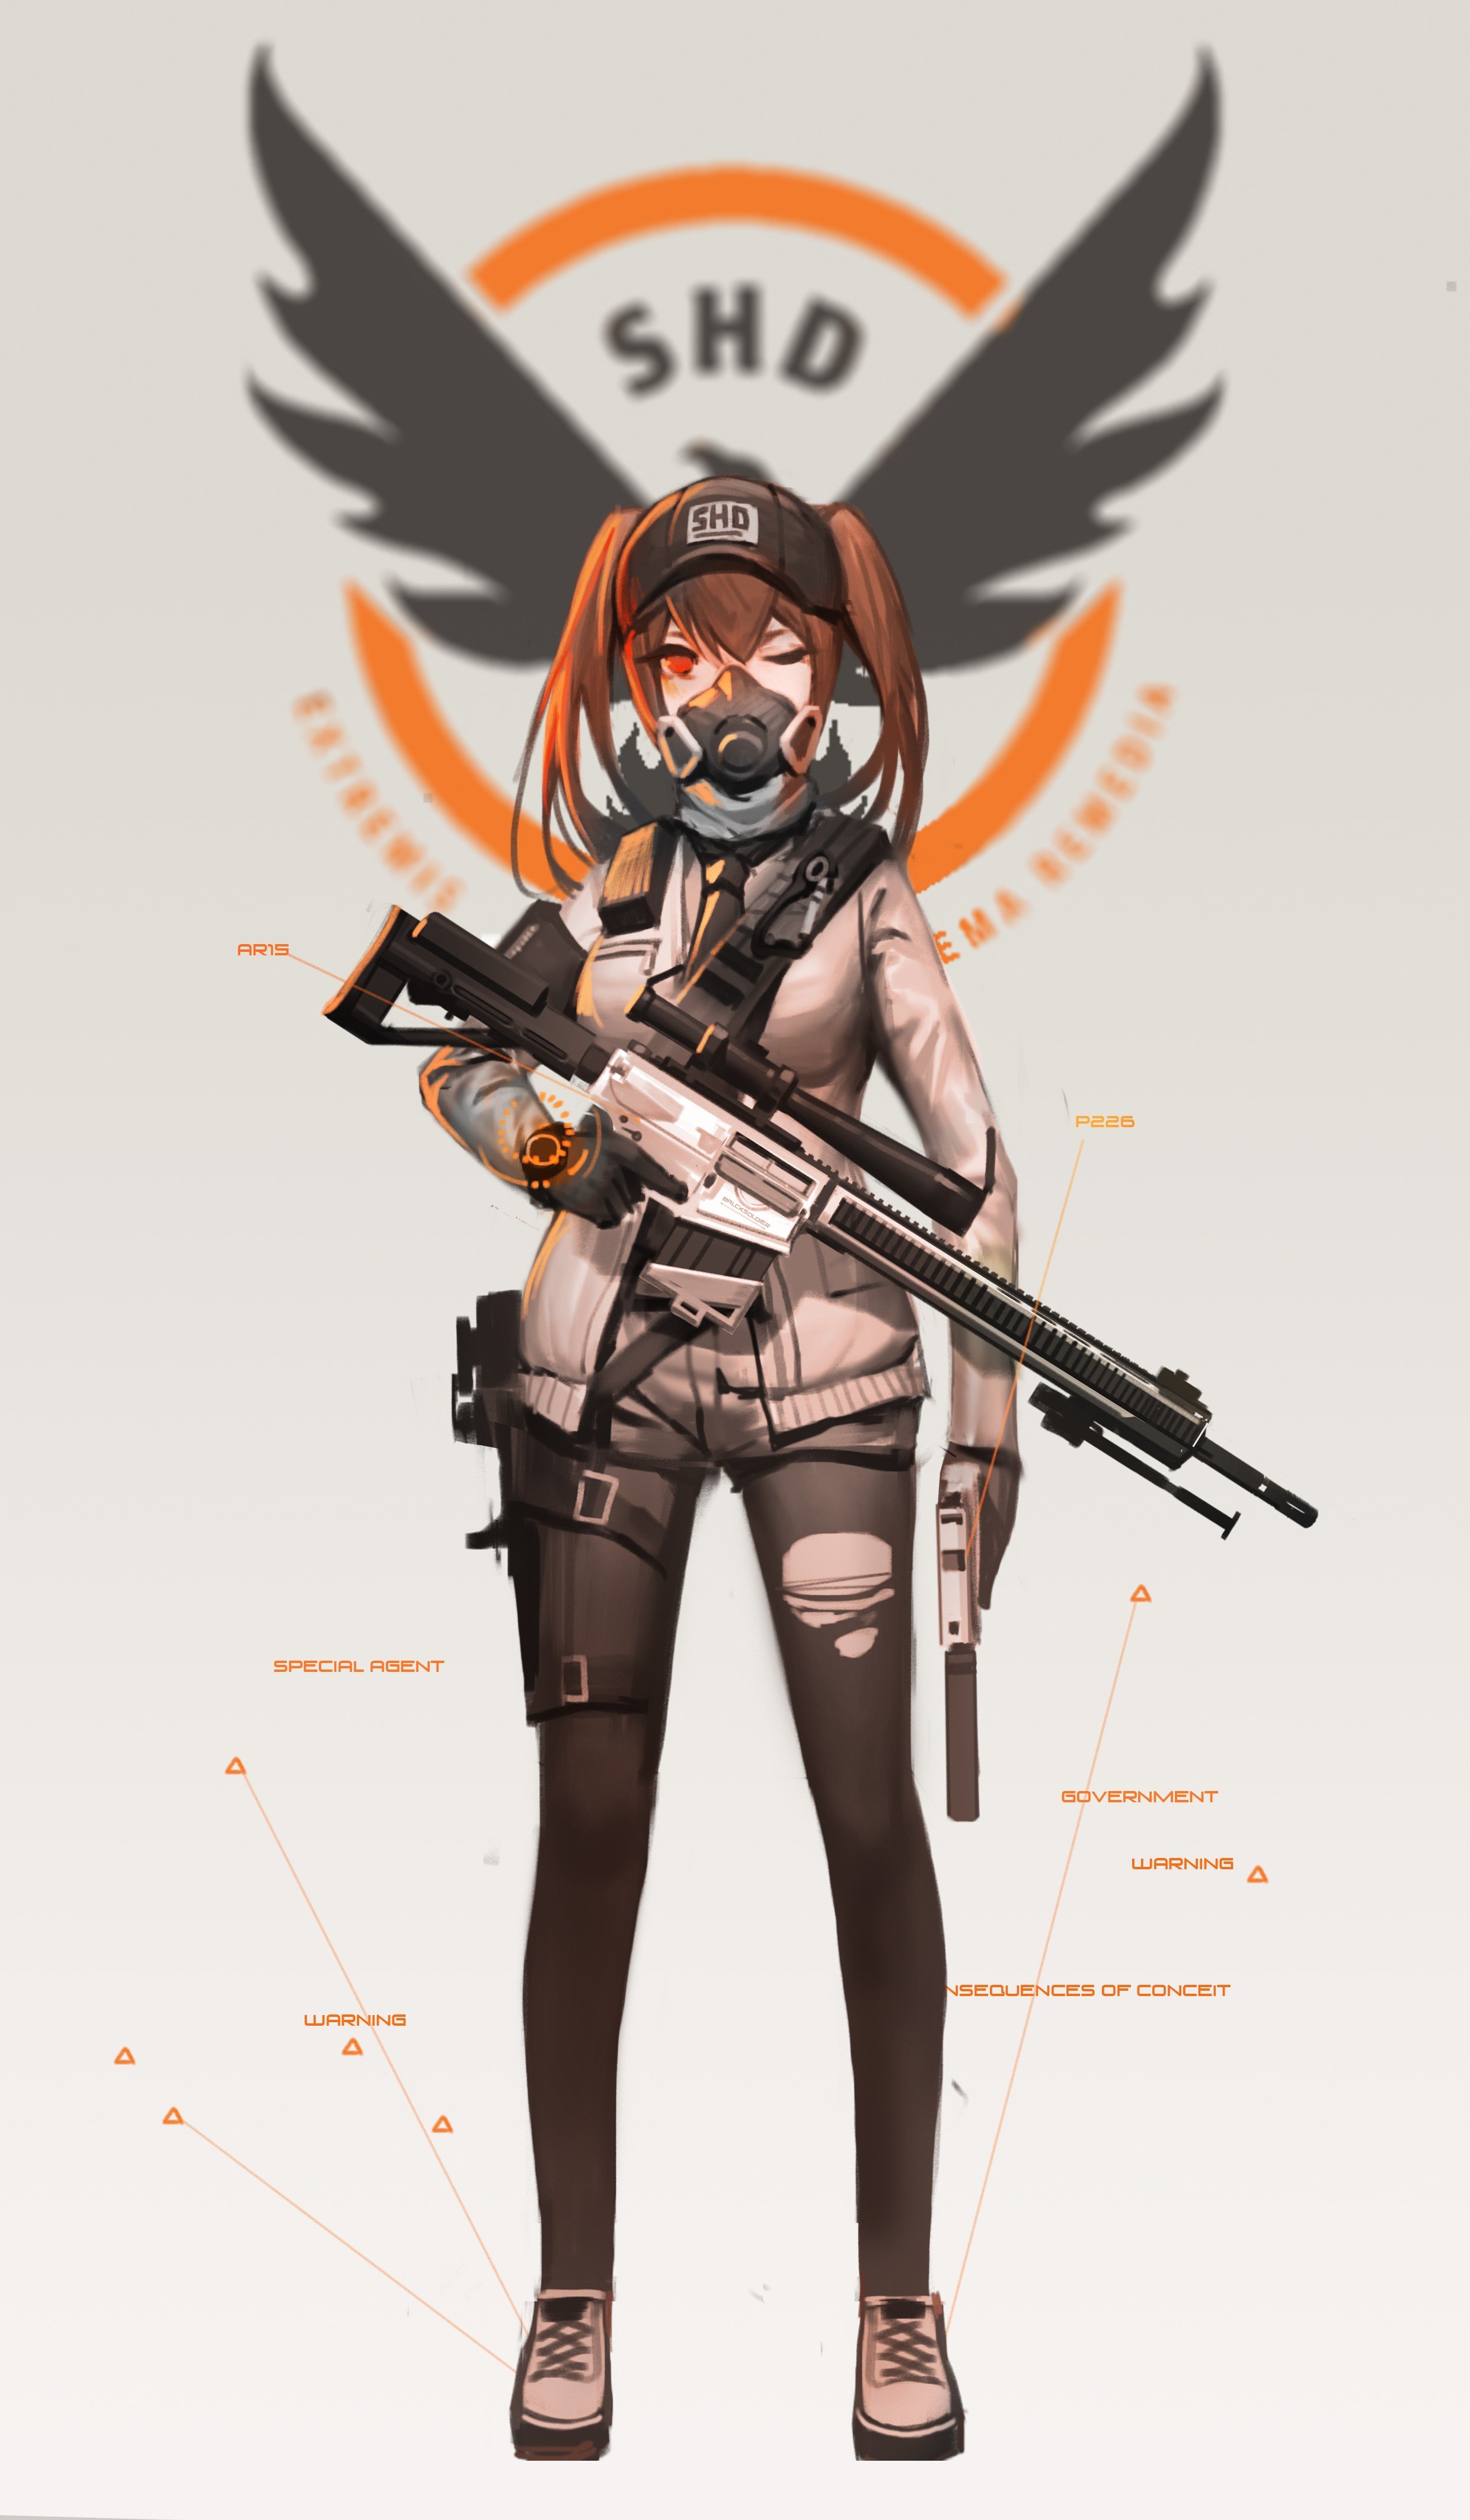 long hair, Brunette, Red eyes, Anime, Anime girls, Tom Clancy&039;s The Division, Twintails, Weapon, Sniper rifle, Gun Wallpaper